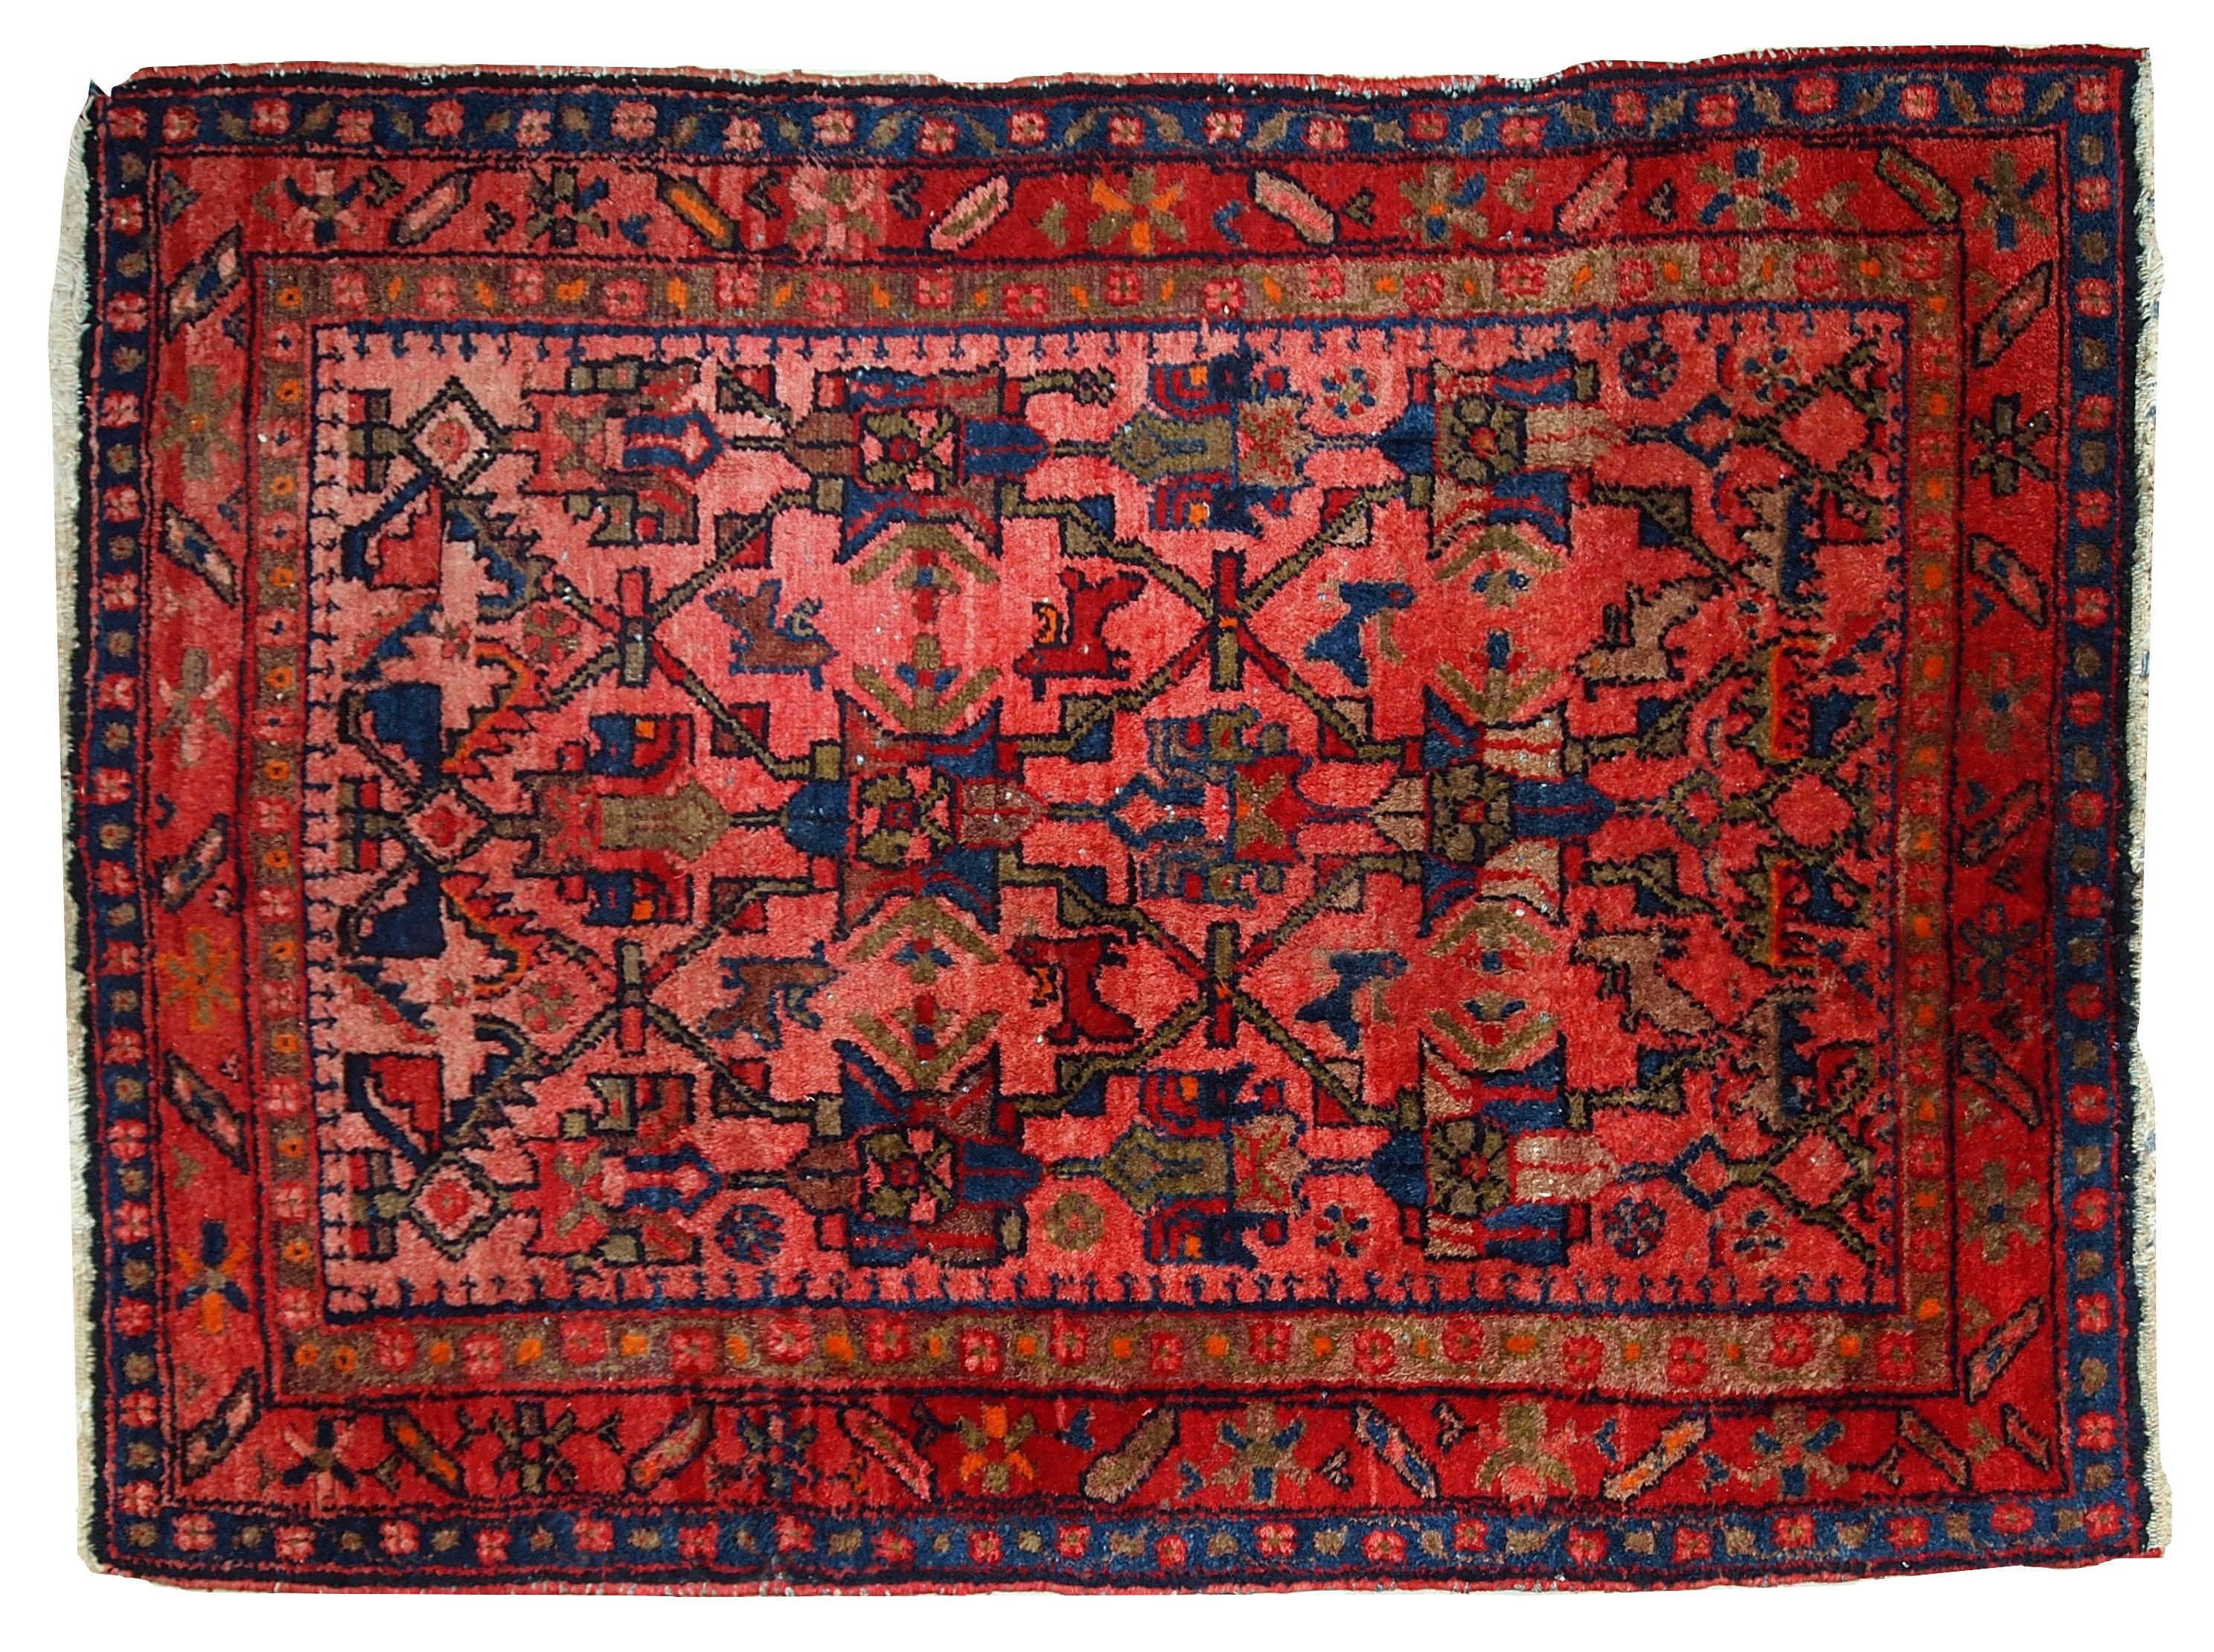 Handmade antique Malayer style rug in original good condition. The main colors of this rug are variety of red shades. The details of the tribal ornaments on it are in navy blue and olive shades. Measures: 3.7' x 5' (113cm x 153cm).